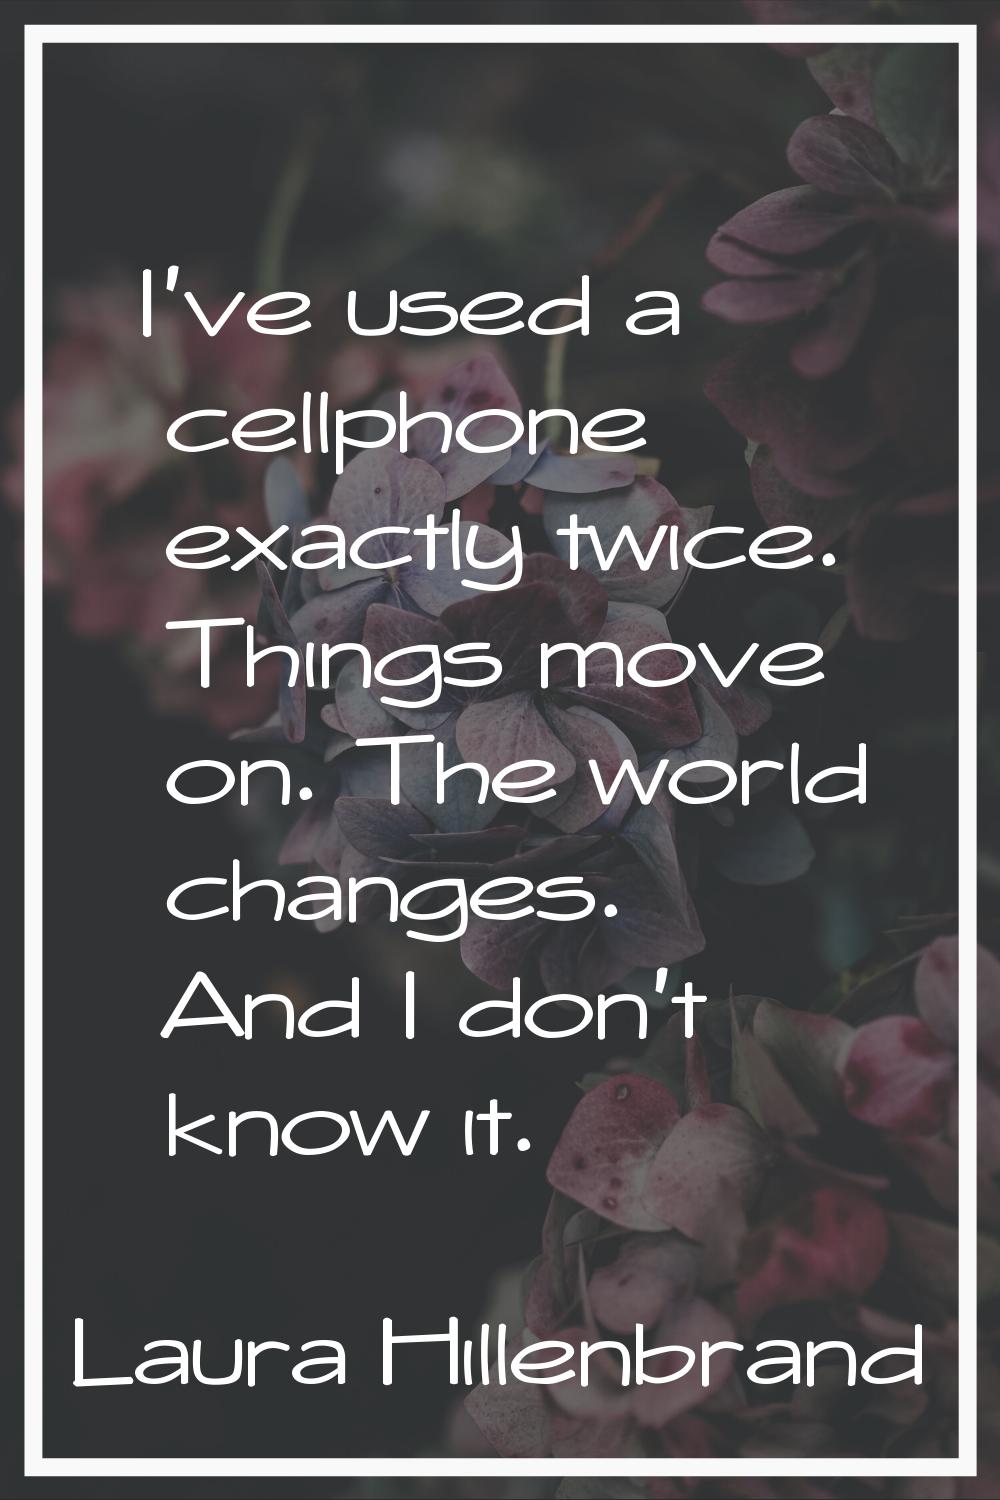 I've used a cellphone exactly twice. Things move on. The world changes. And I don't know it.